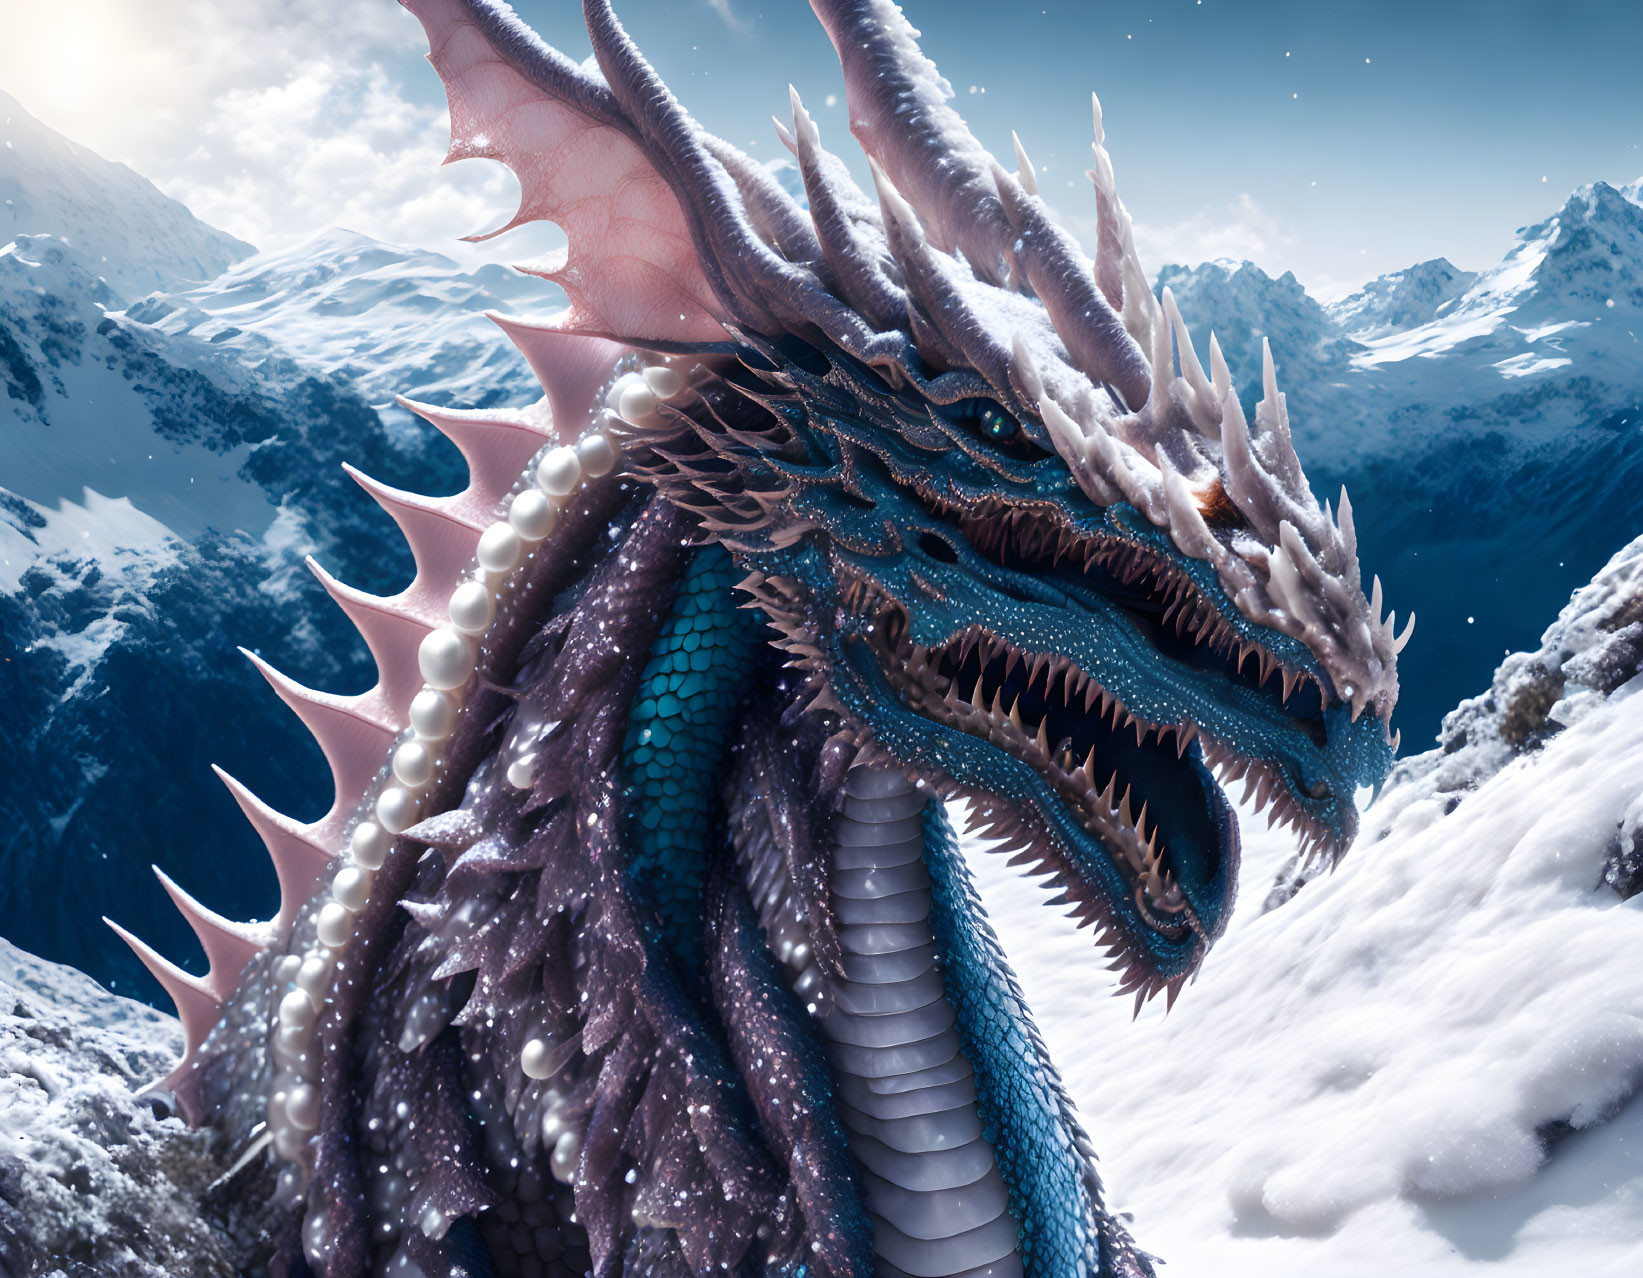 Majestic dragon with blue and purple scales in snowy mountain landscape